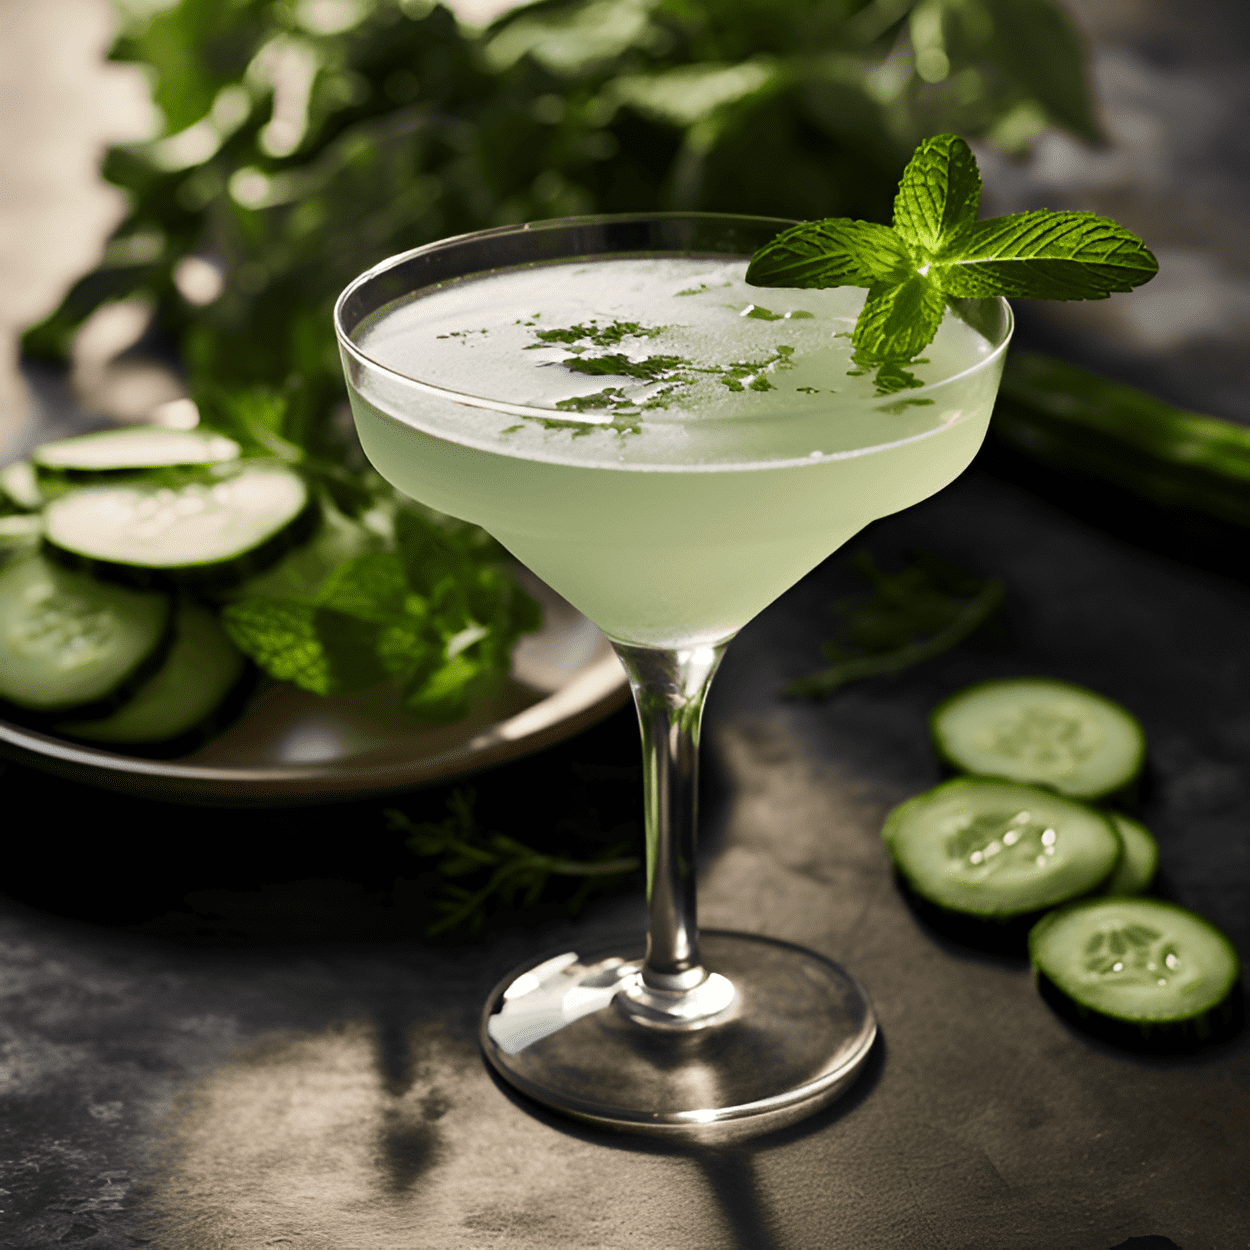 Cucumber Basil Martini Cocktail Recipe - This cocktail has a refreshing, crisp, and slightly savory taste. The cucumber provides a cool and fresh flavor, while the basil adds a hint of peppery sweetness. The gin gives it a strong, juniper-forward base, and the lime juice adds a touch of tartness.